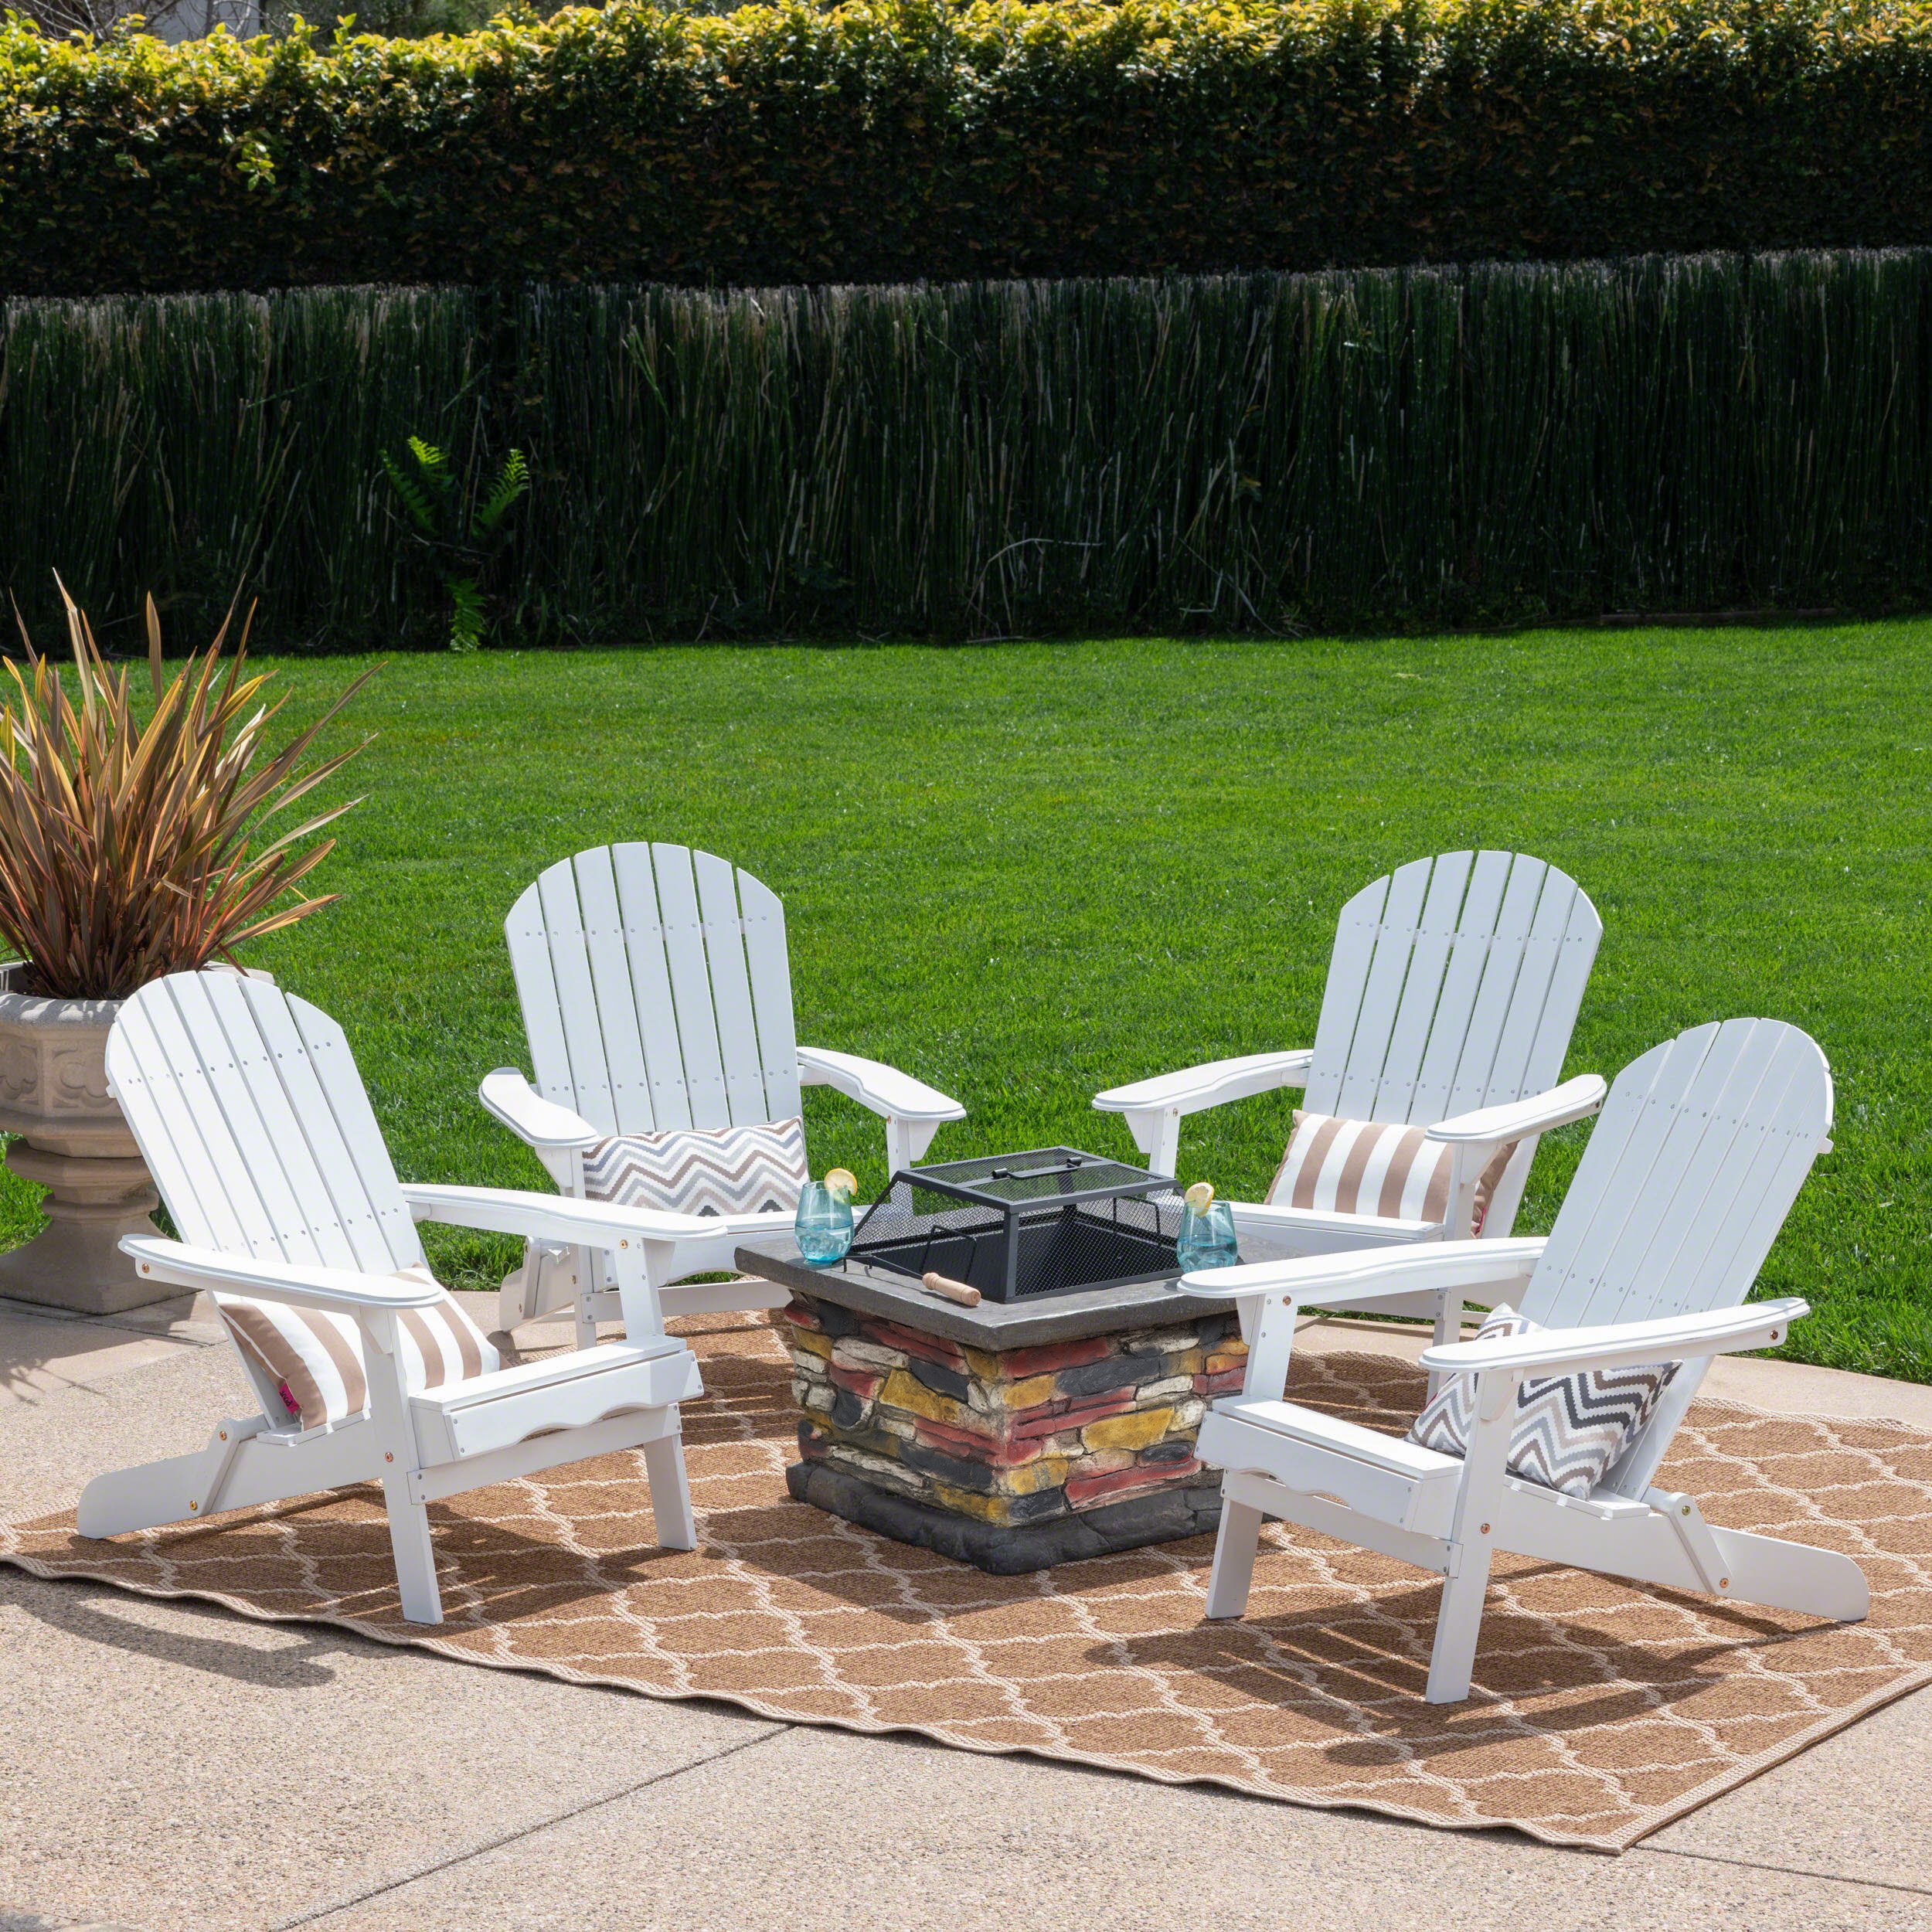 Benson Outdoor 5 Piece Acacia Wood/ Light Weight Concrete Adirondack Chair Set With Fire Pit - White